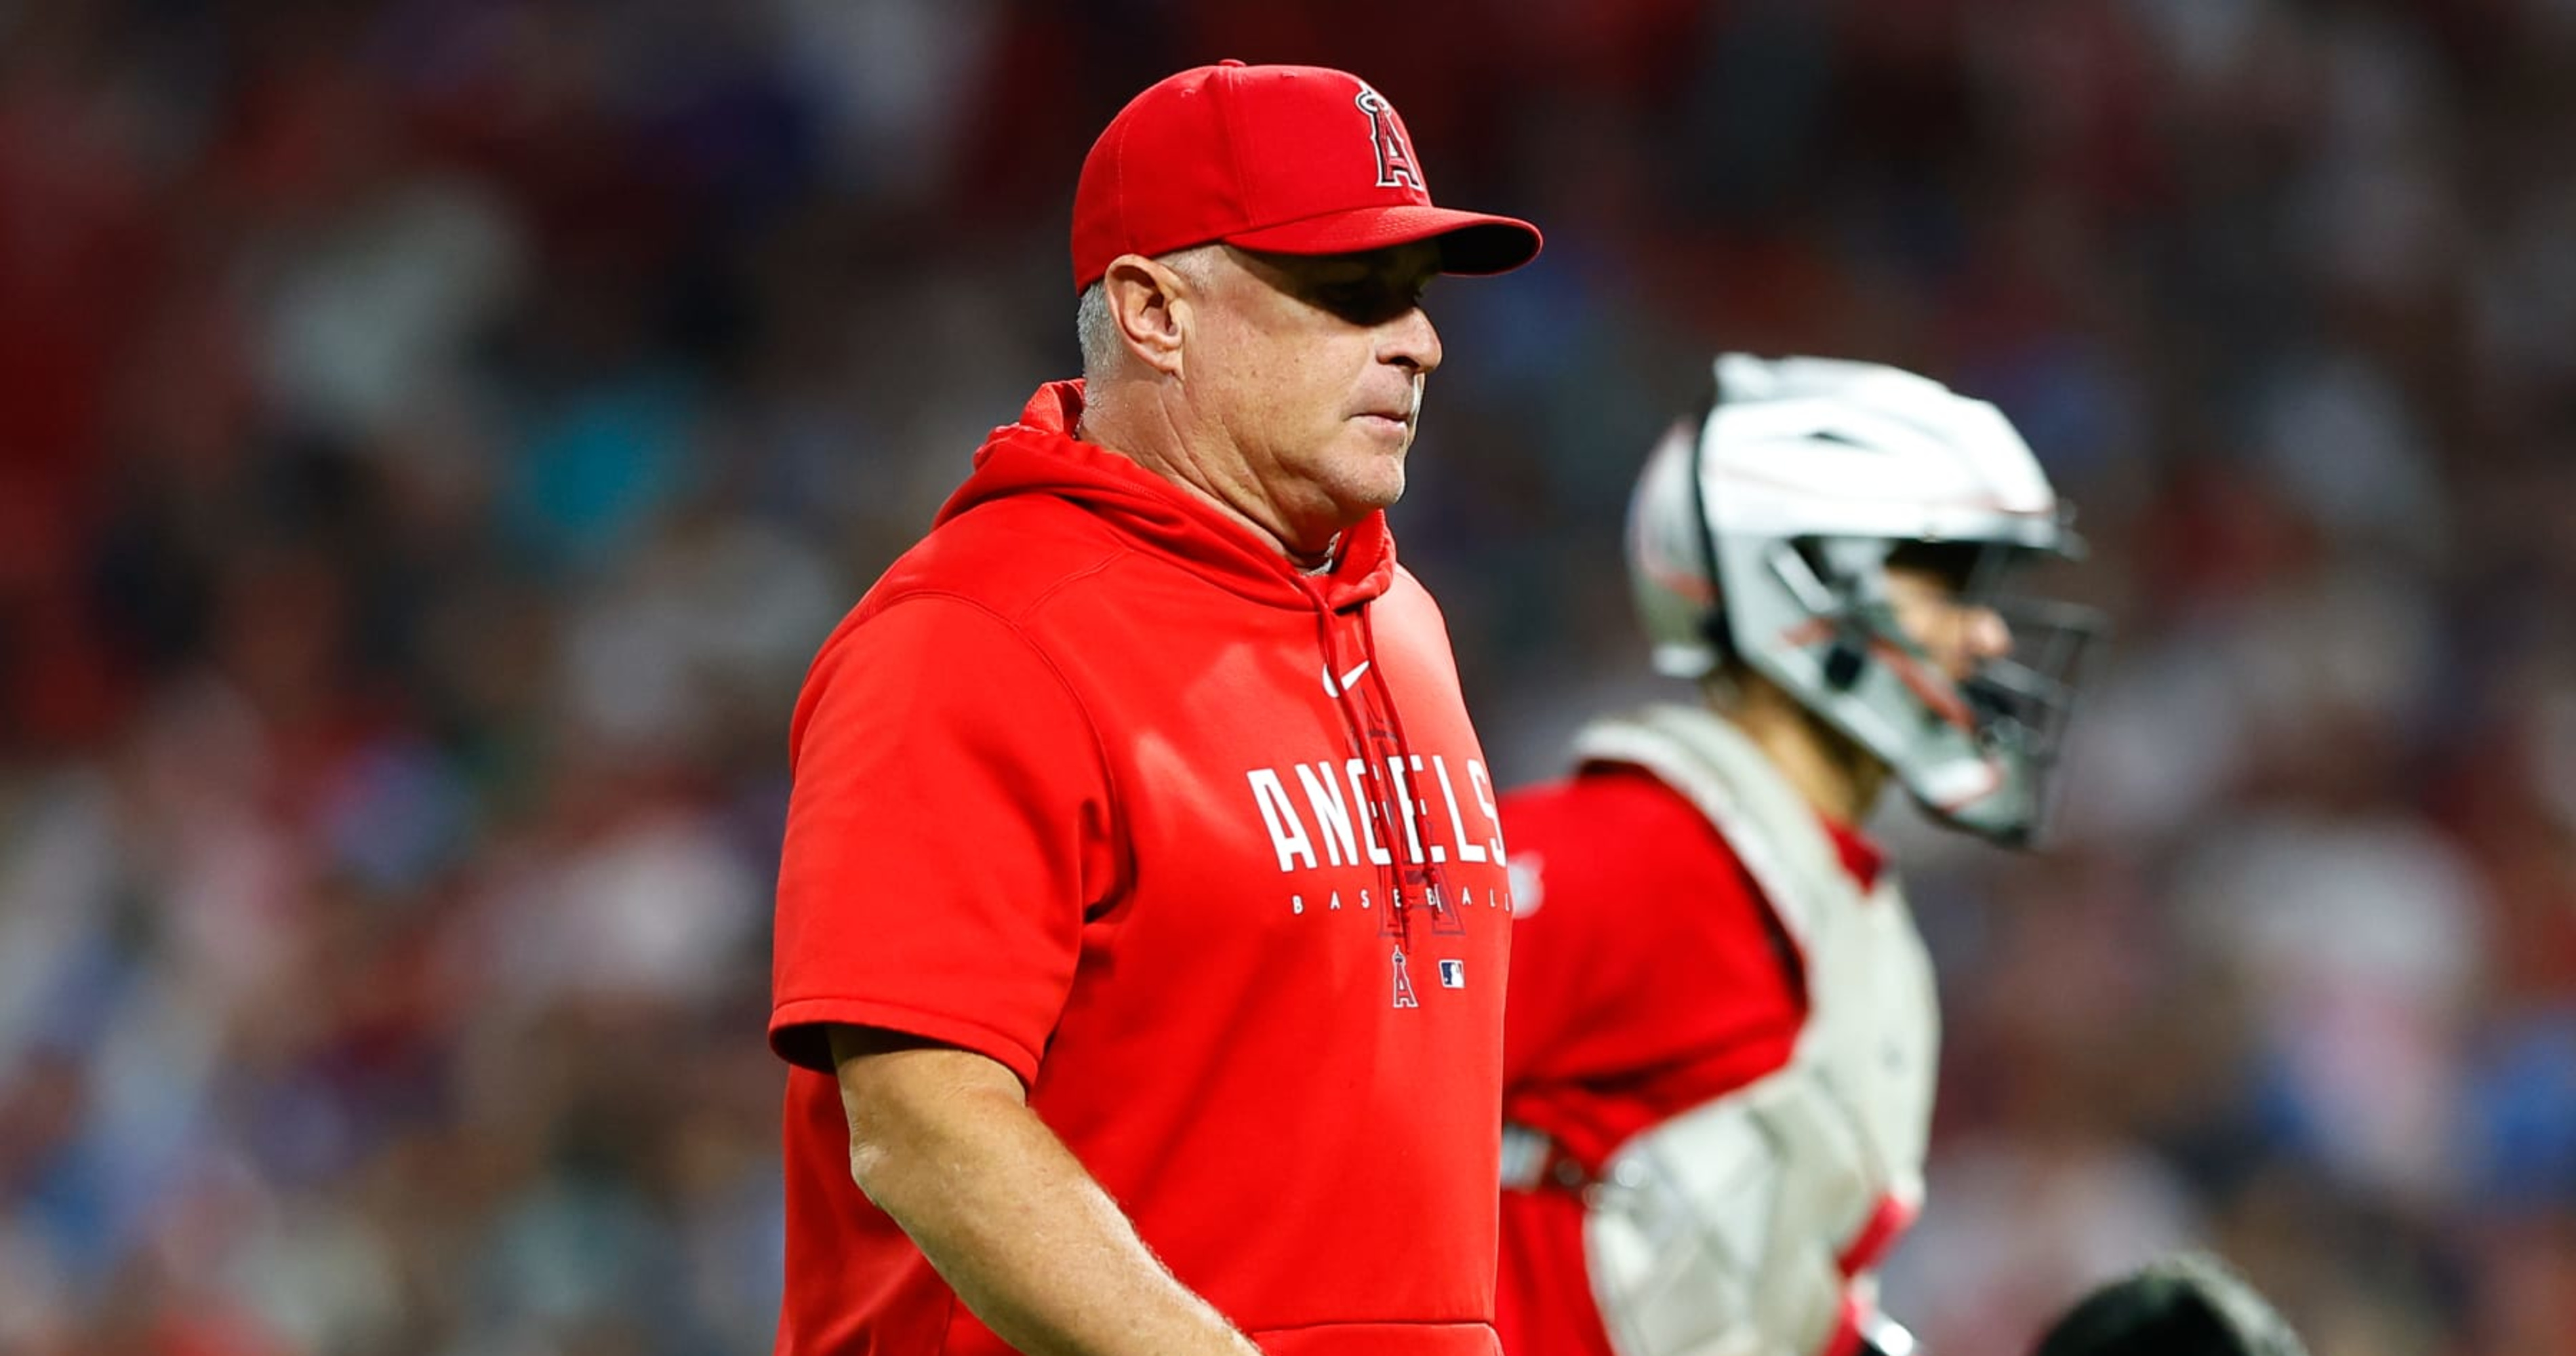 Phil Nevin out as Angels manager, while Perry Minasian remains GM